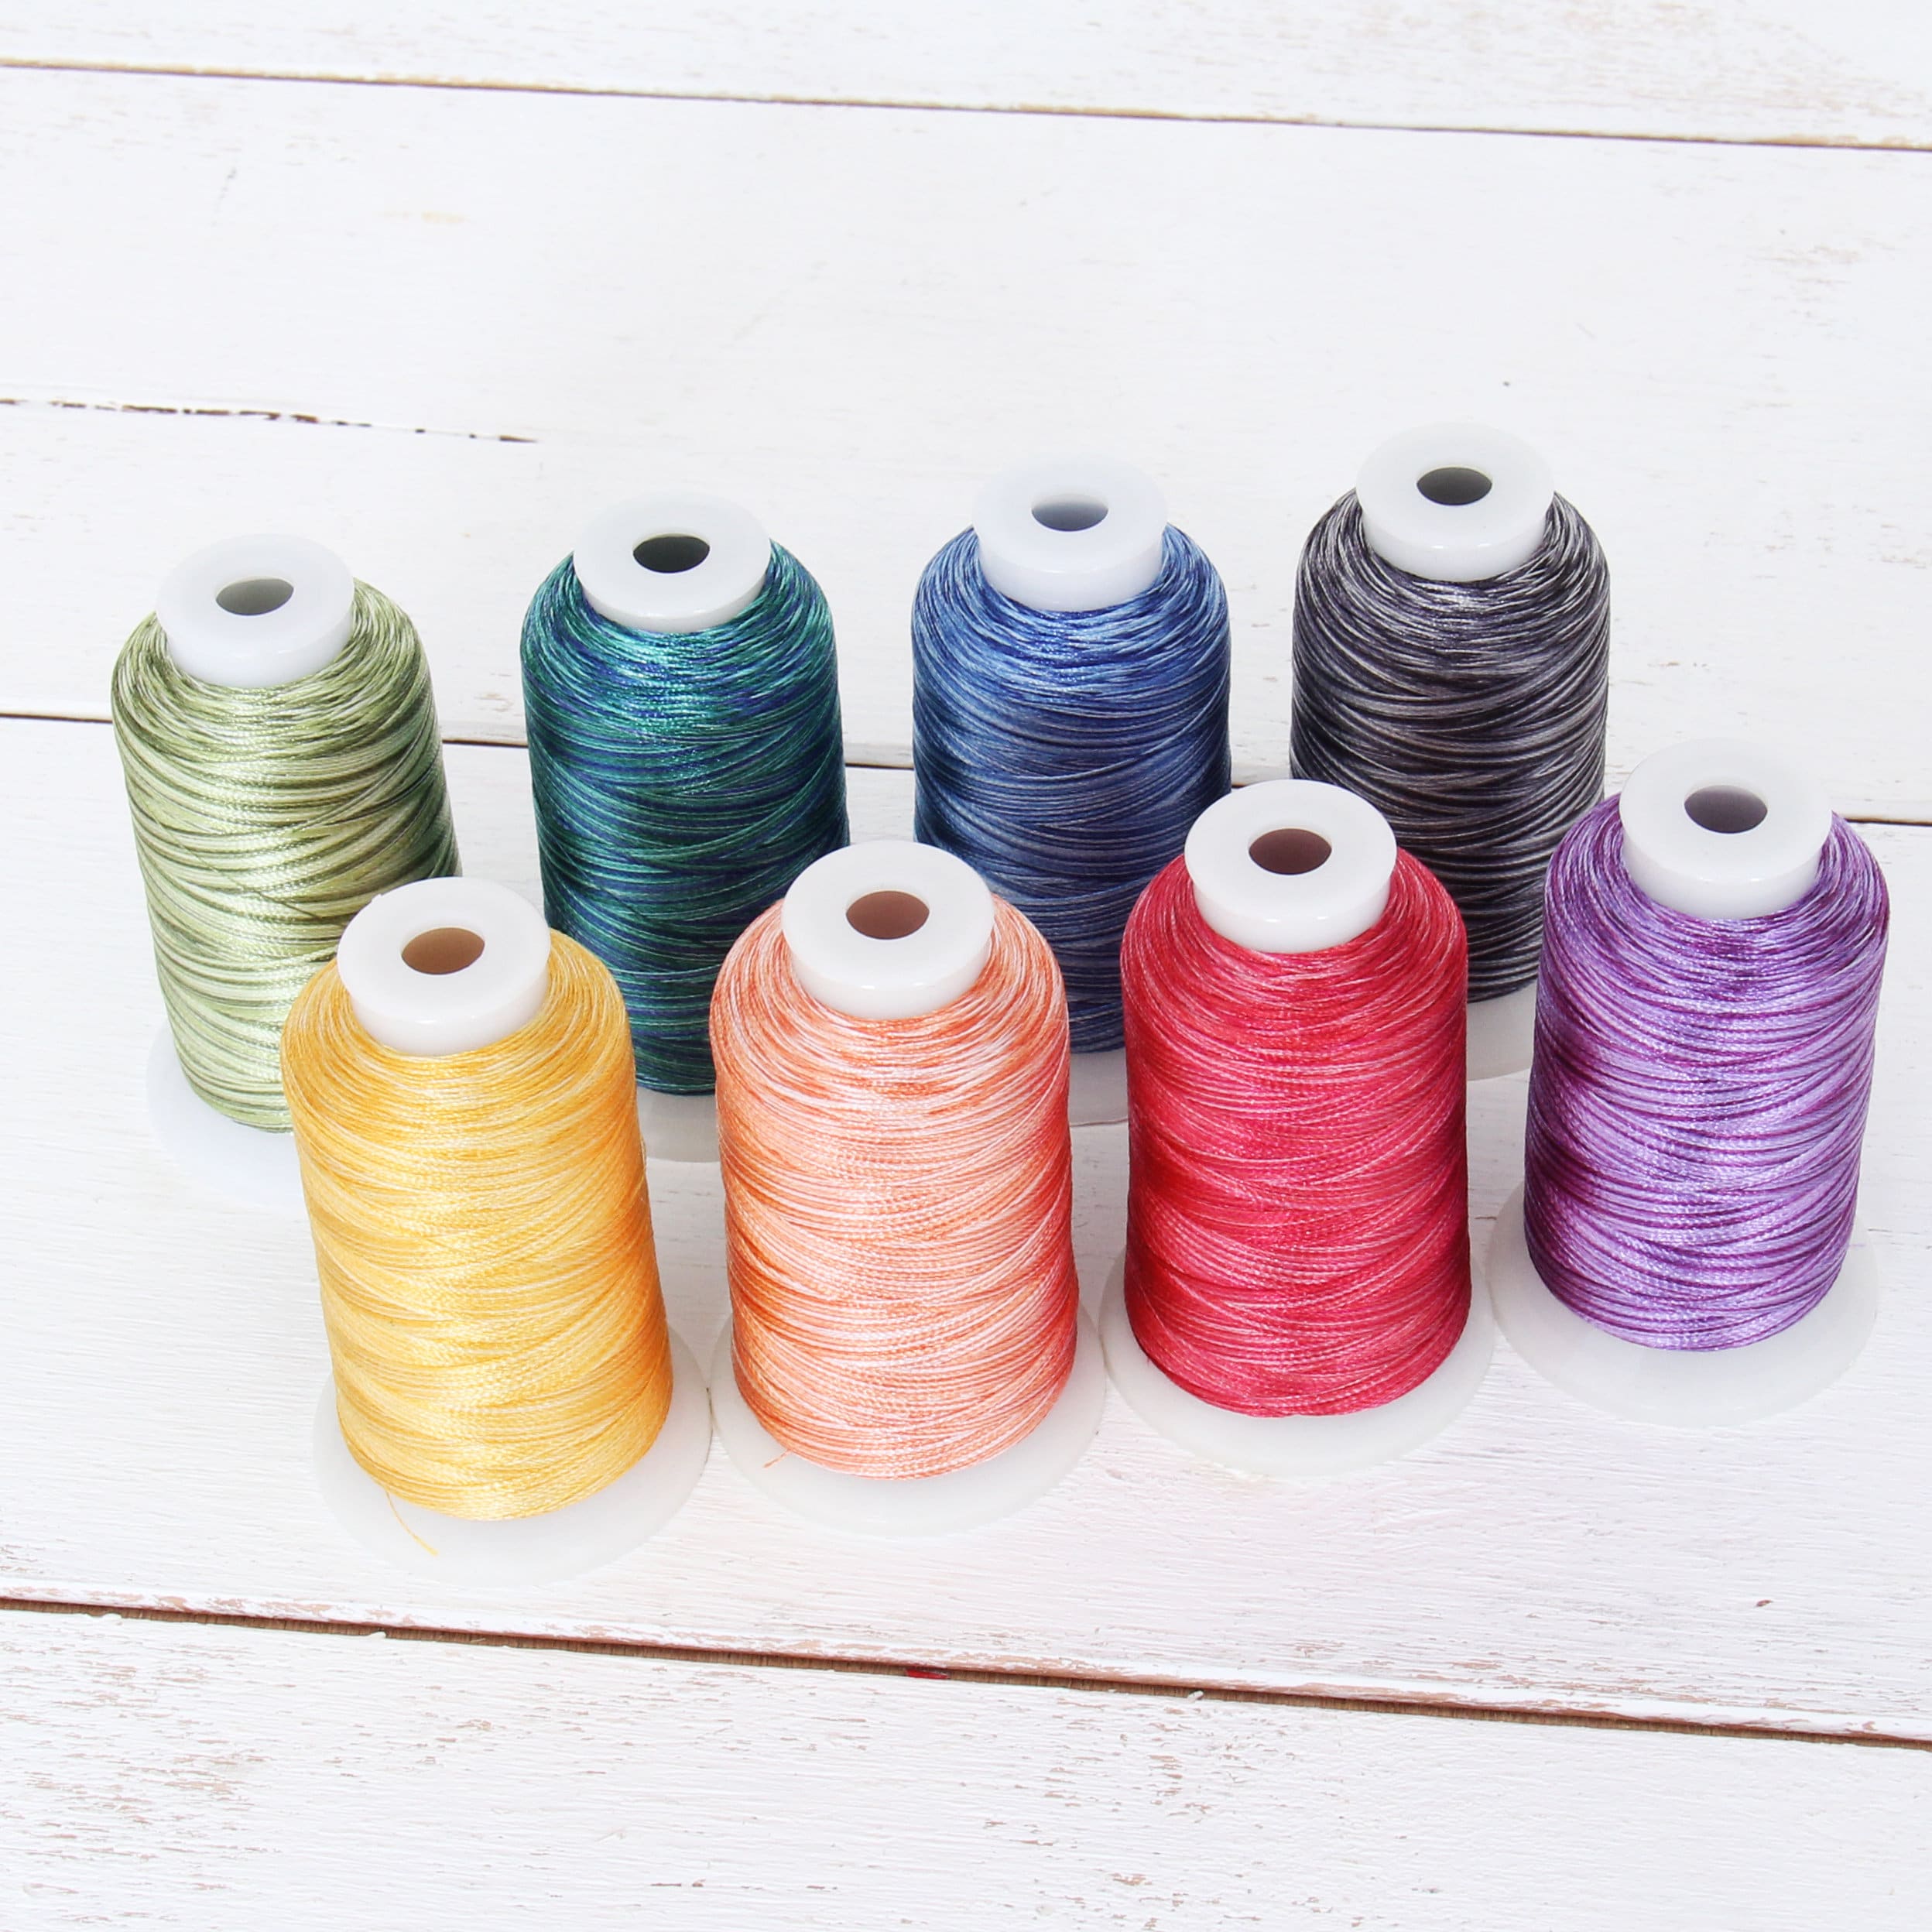 Coats Cotton Machine Quilting Multicolor Thread 1200yd Over The Rainbow